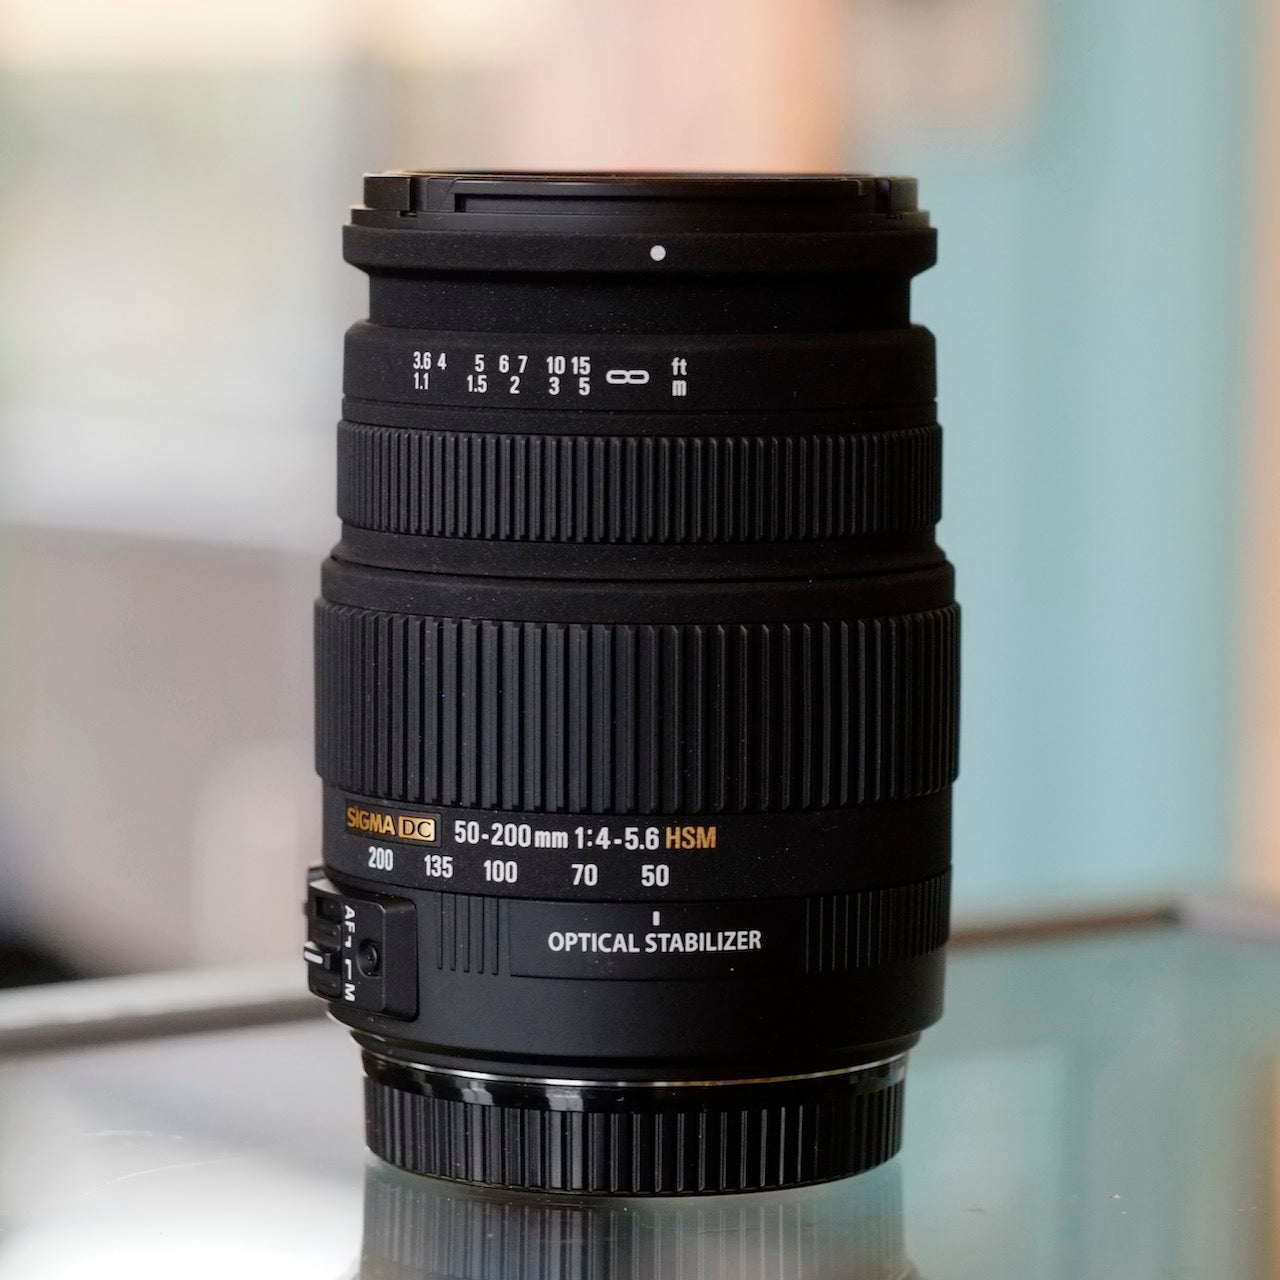 Sigma DC 50-200mm f4-5.6 HSM for Canon EF-S